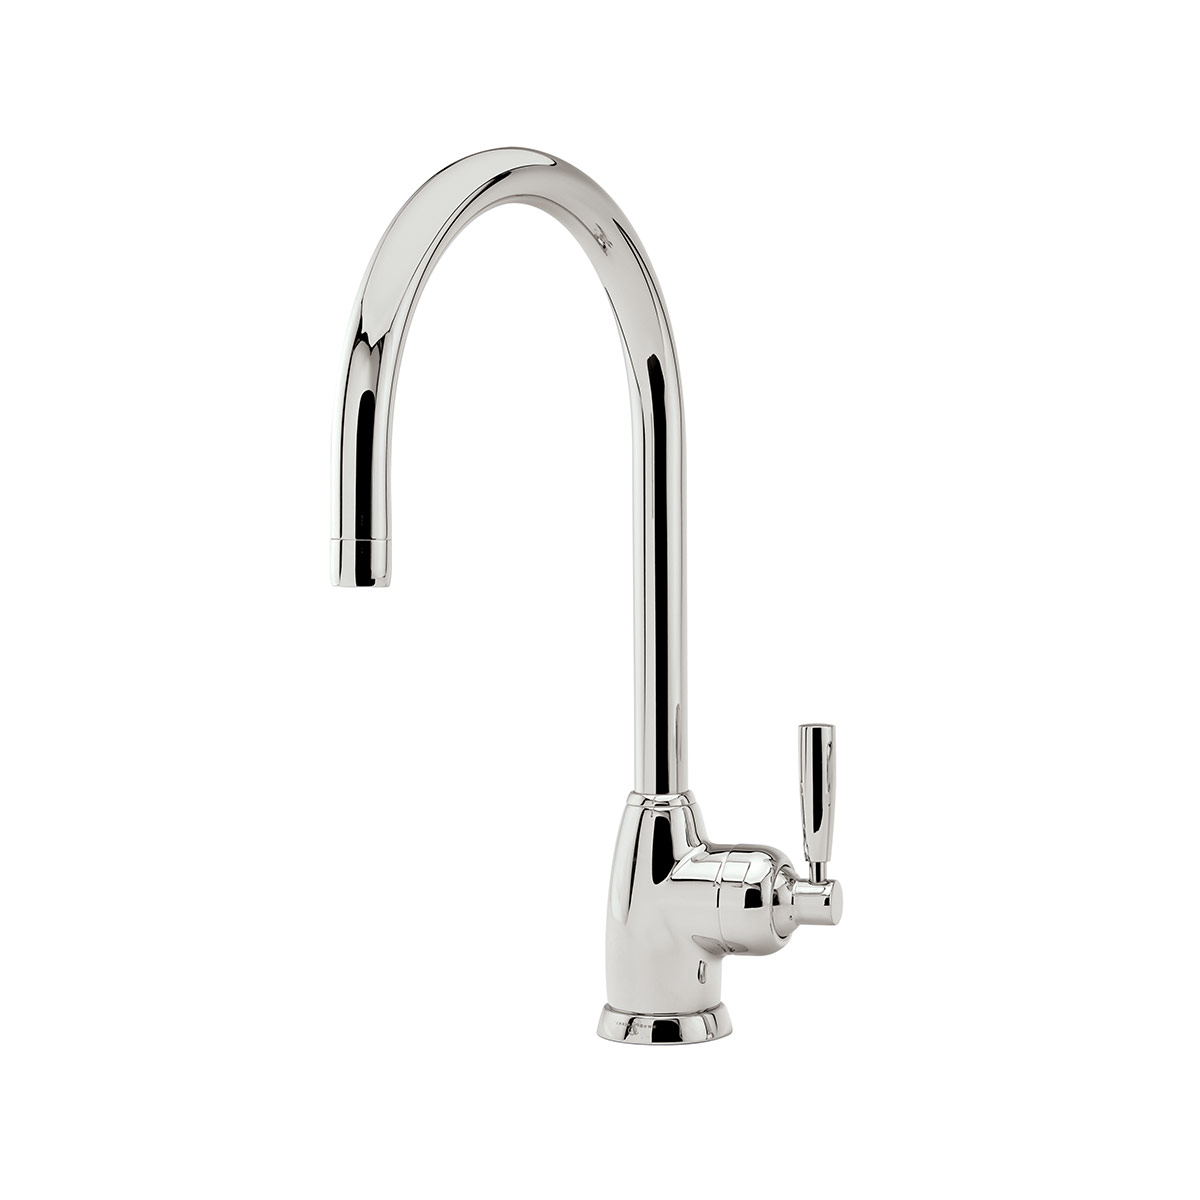 Shaws by Perrin & Rowe Roeburn kitchen mixer in Nickel. Mimas style monobloc kitchen tap AUSH.4841. Distributed in Australia by Luxe by Design, Brisbane.